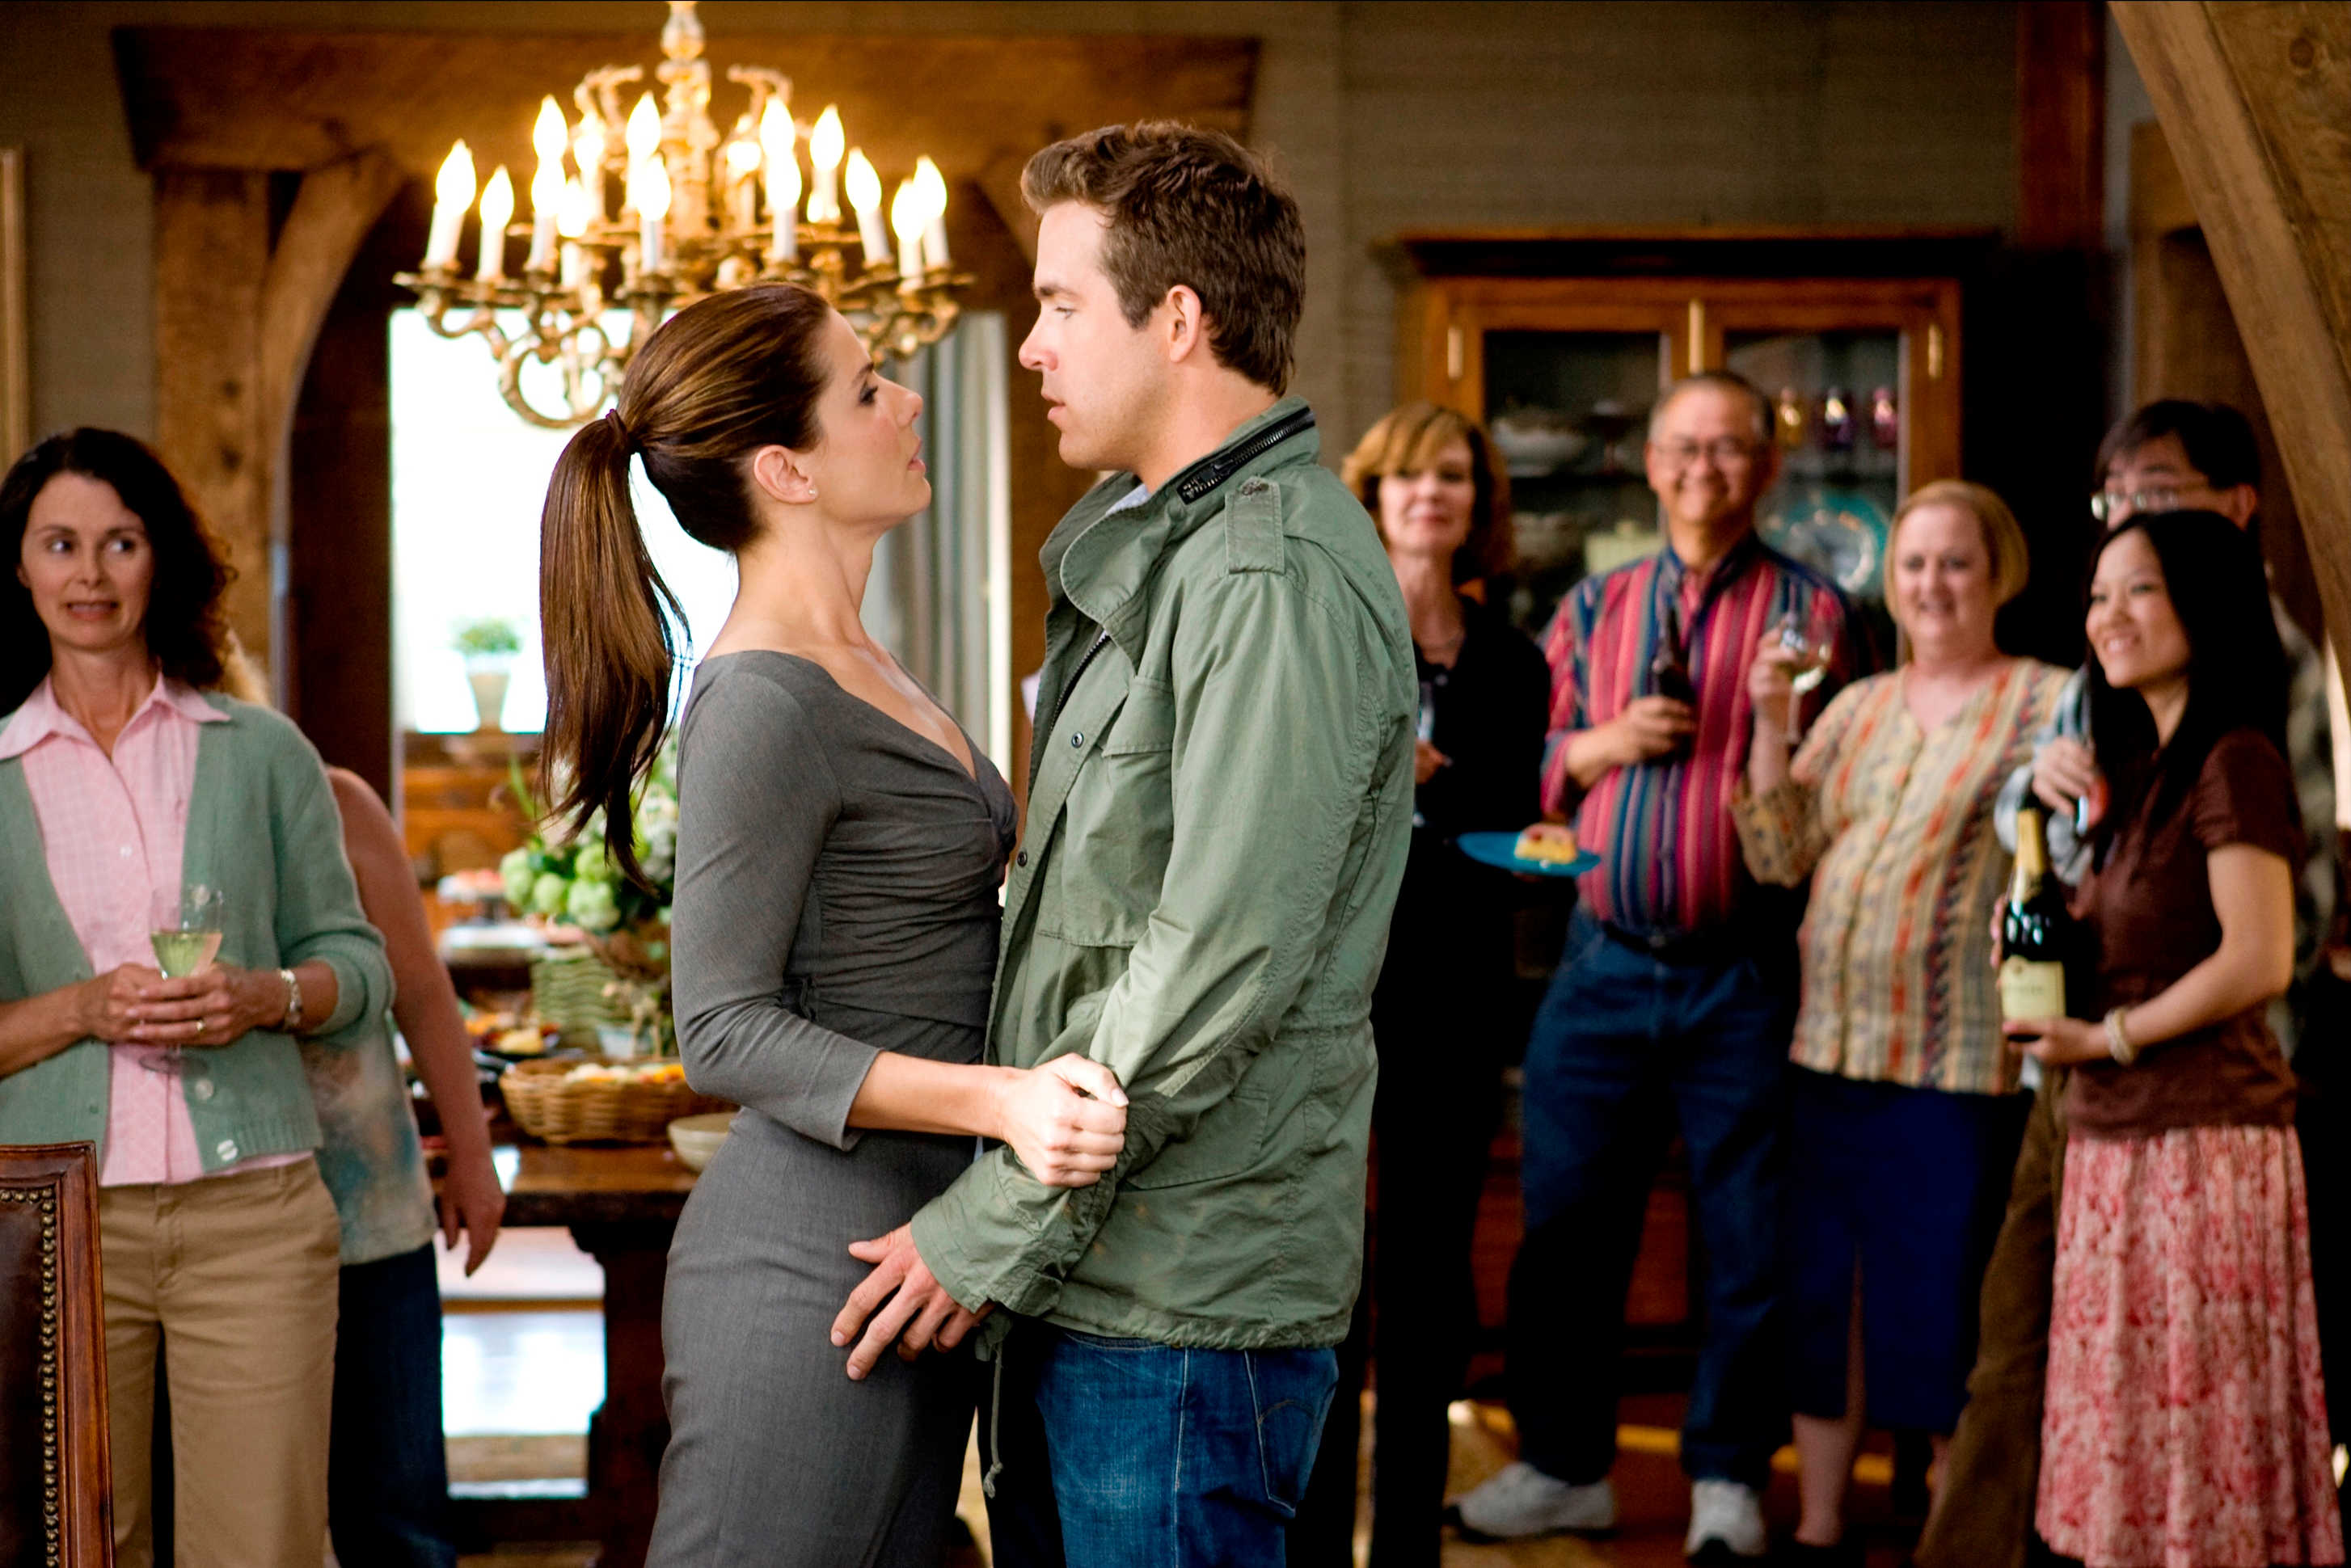 Sandra Bullock stars as Margaret Tate and Ryan Reynolds stars as Andrew Paxton in Touchstone Pictures' The Proposal (2009). Photo credit by Kerry Hayes.